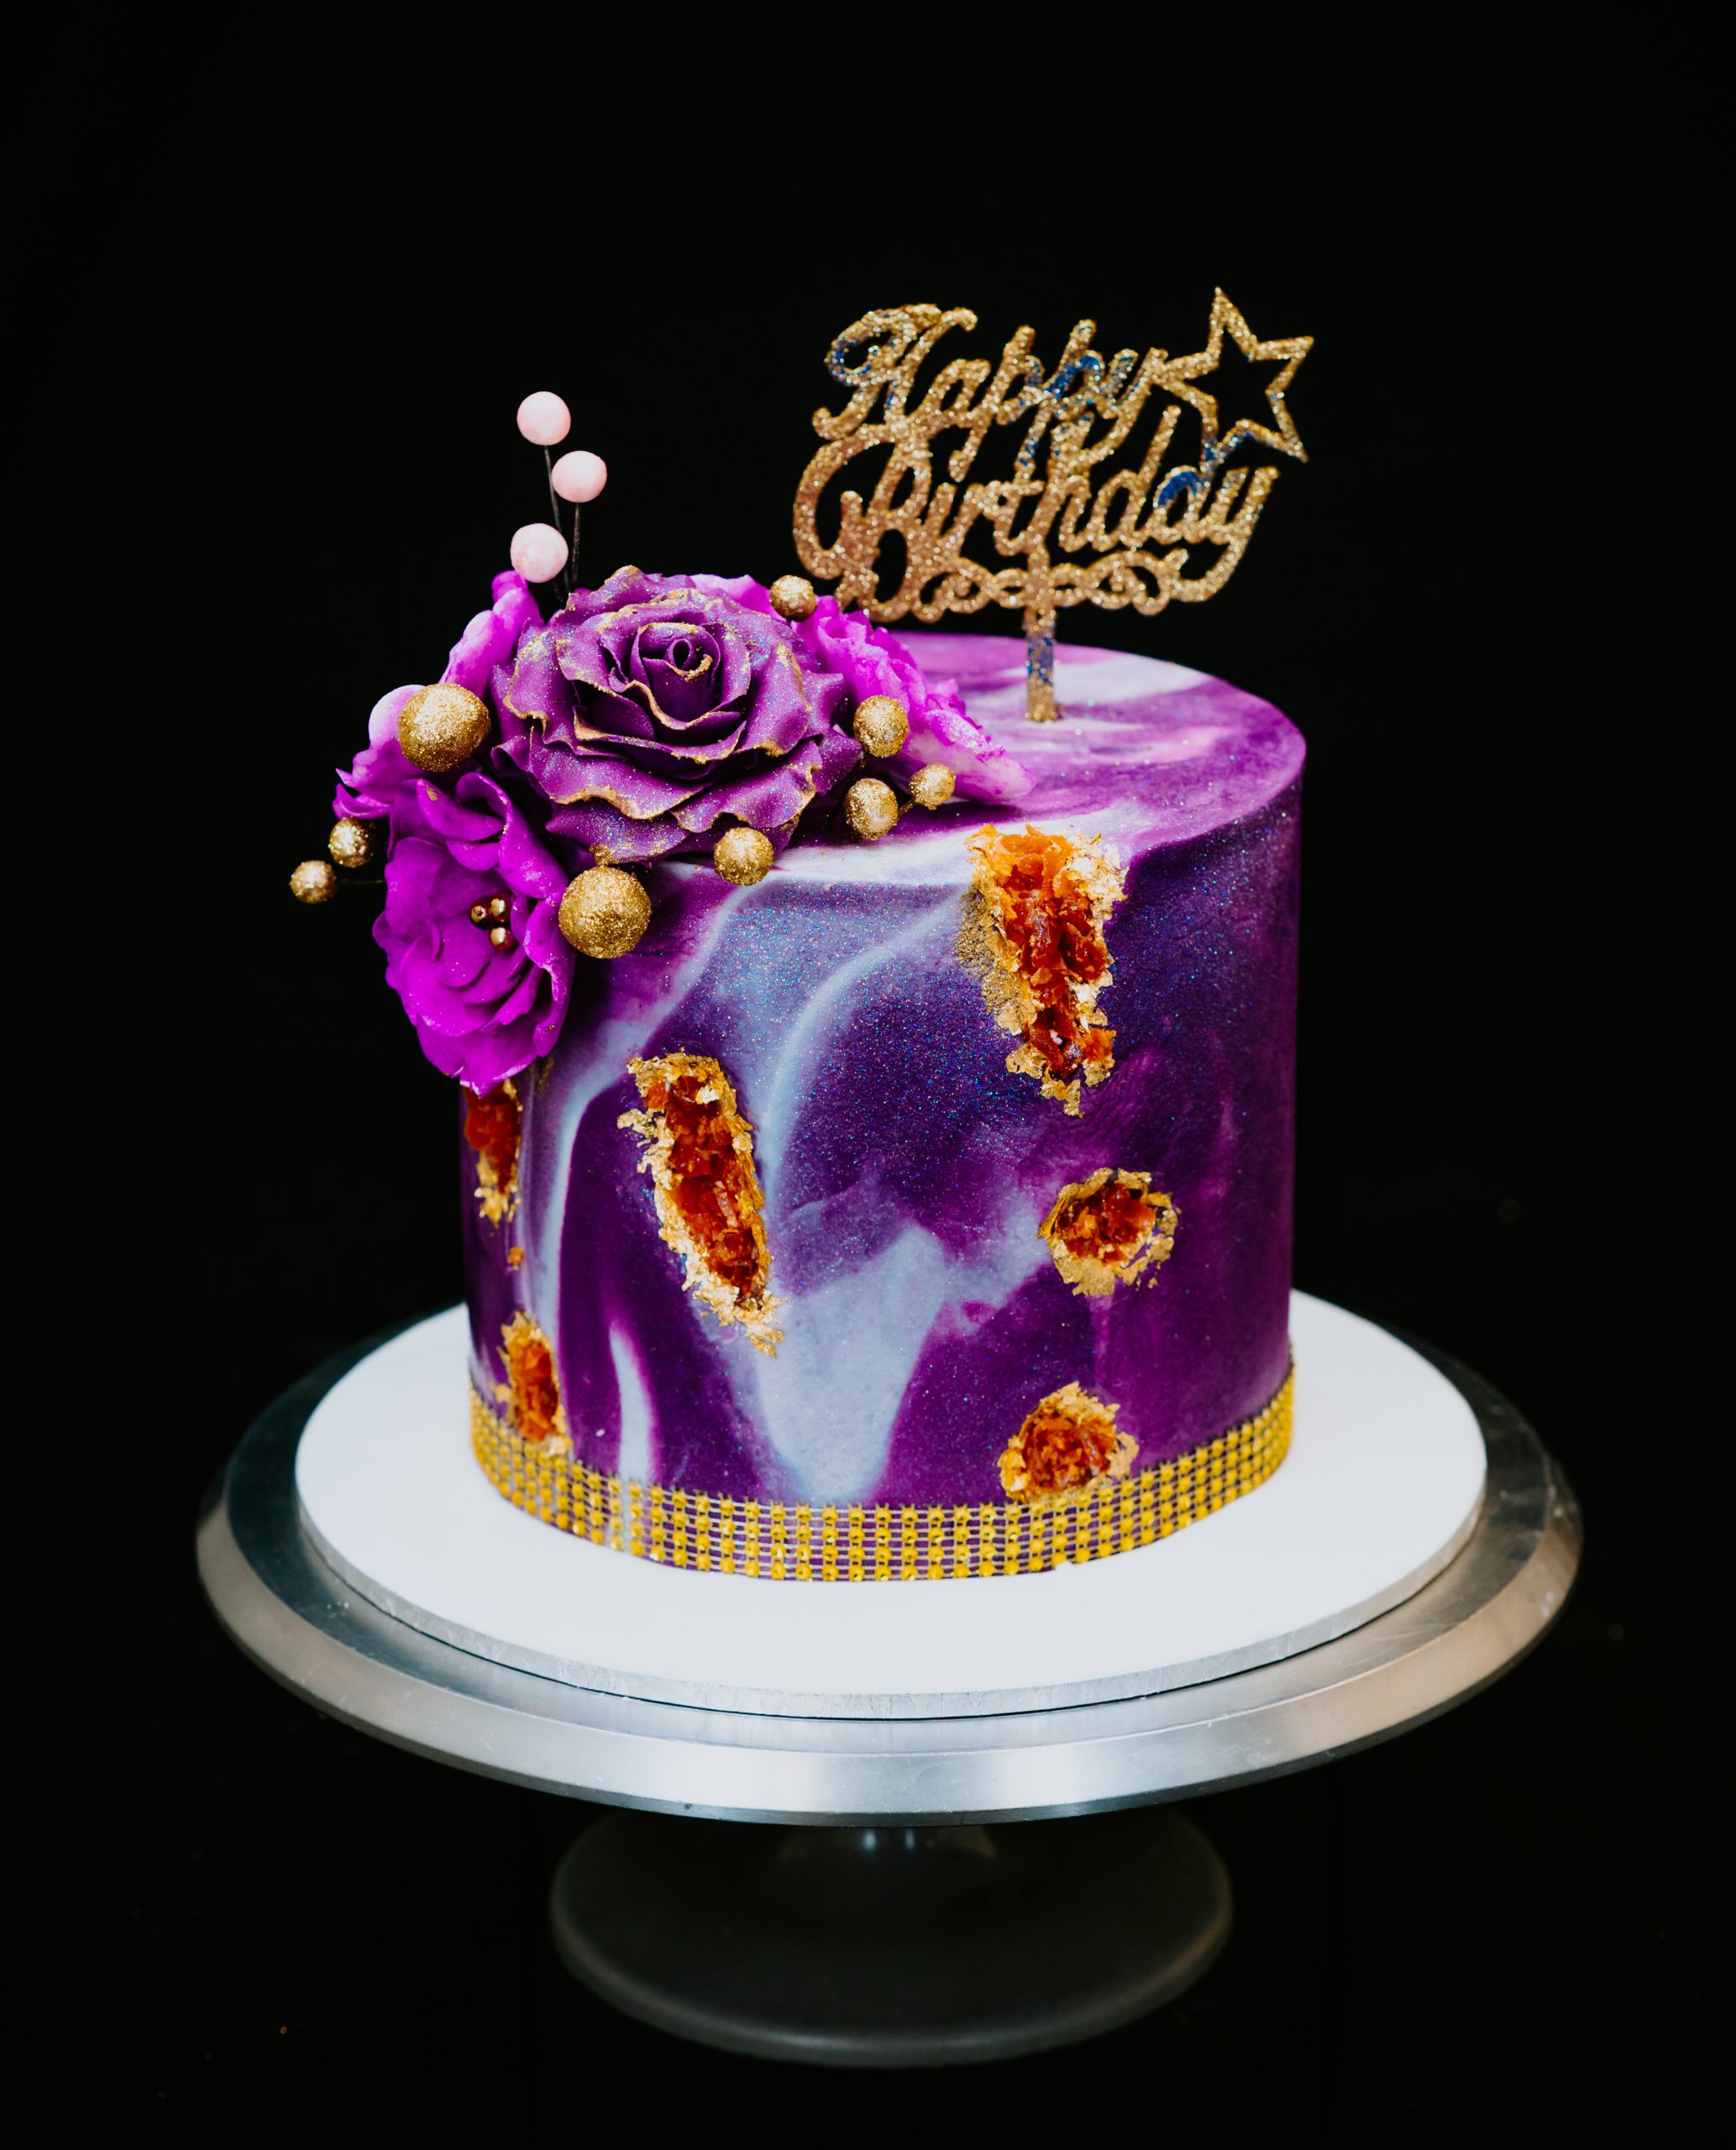 43 Cute Cake Decorating For Your Next Celebration : Dark purple and ivory  cake